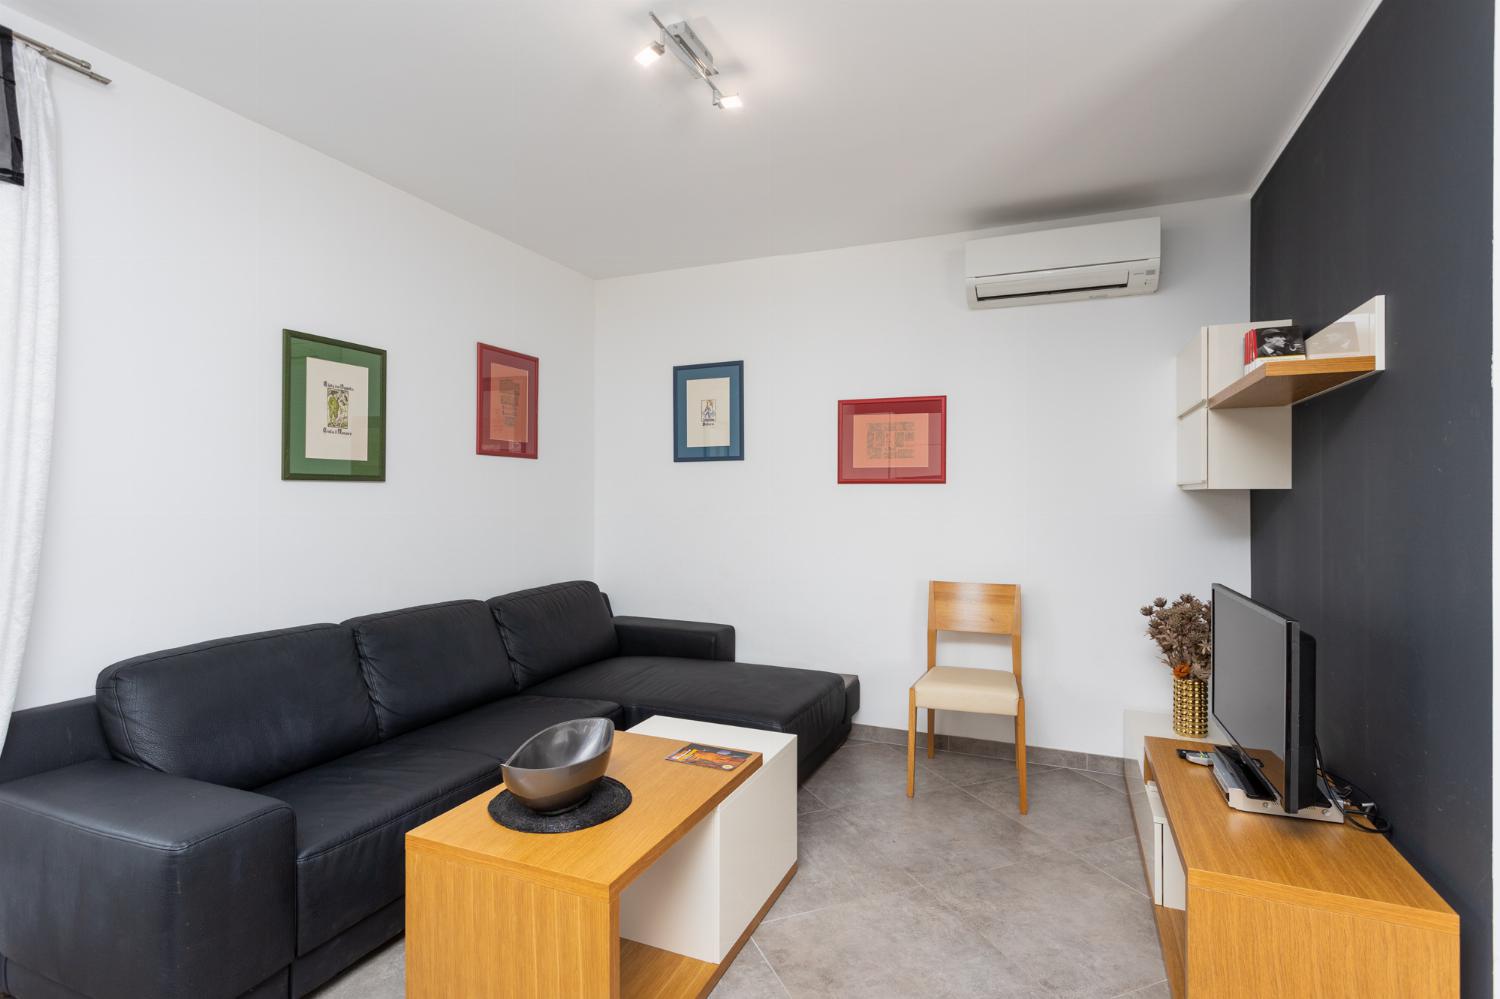 Open-plan living room with sofa, dining area, kitchen, A/C, WiFi internet, and satellite TV